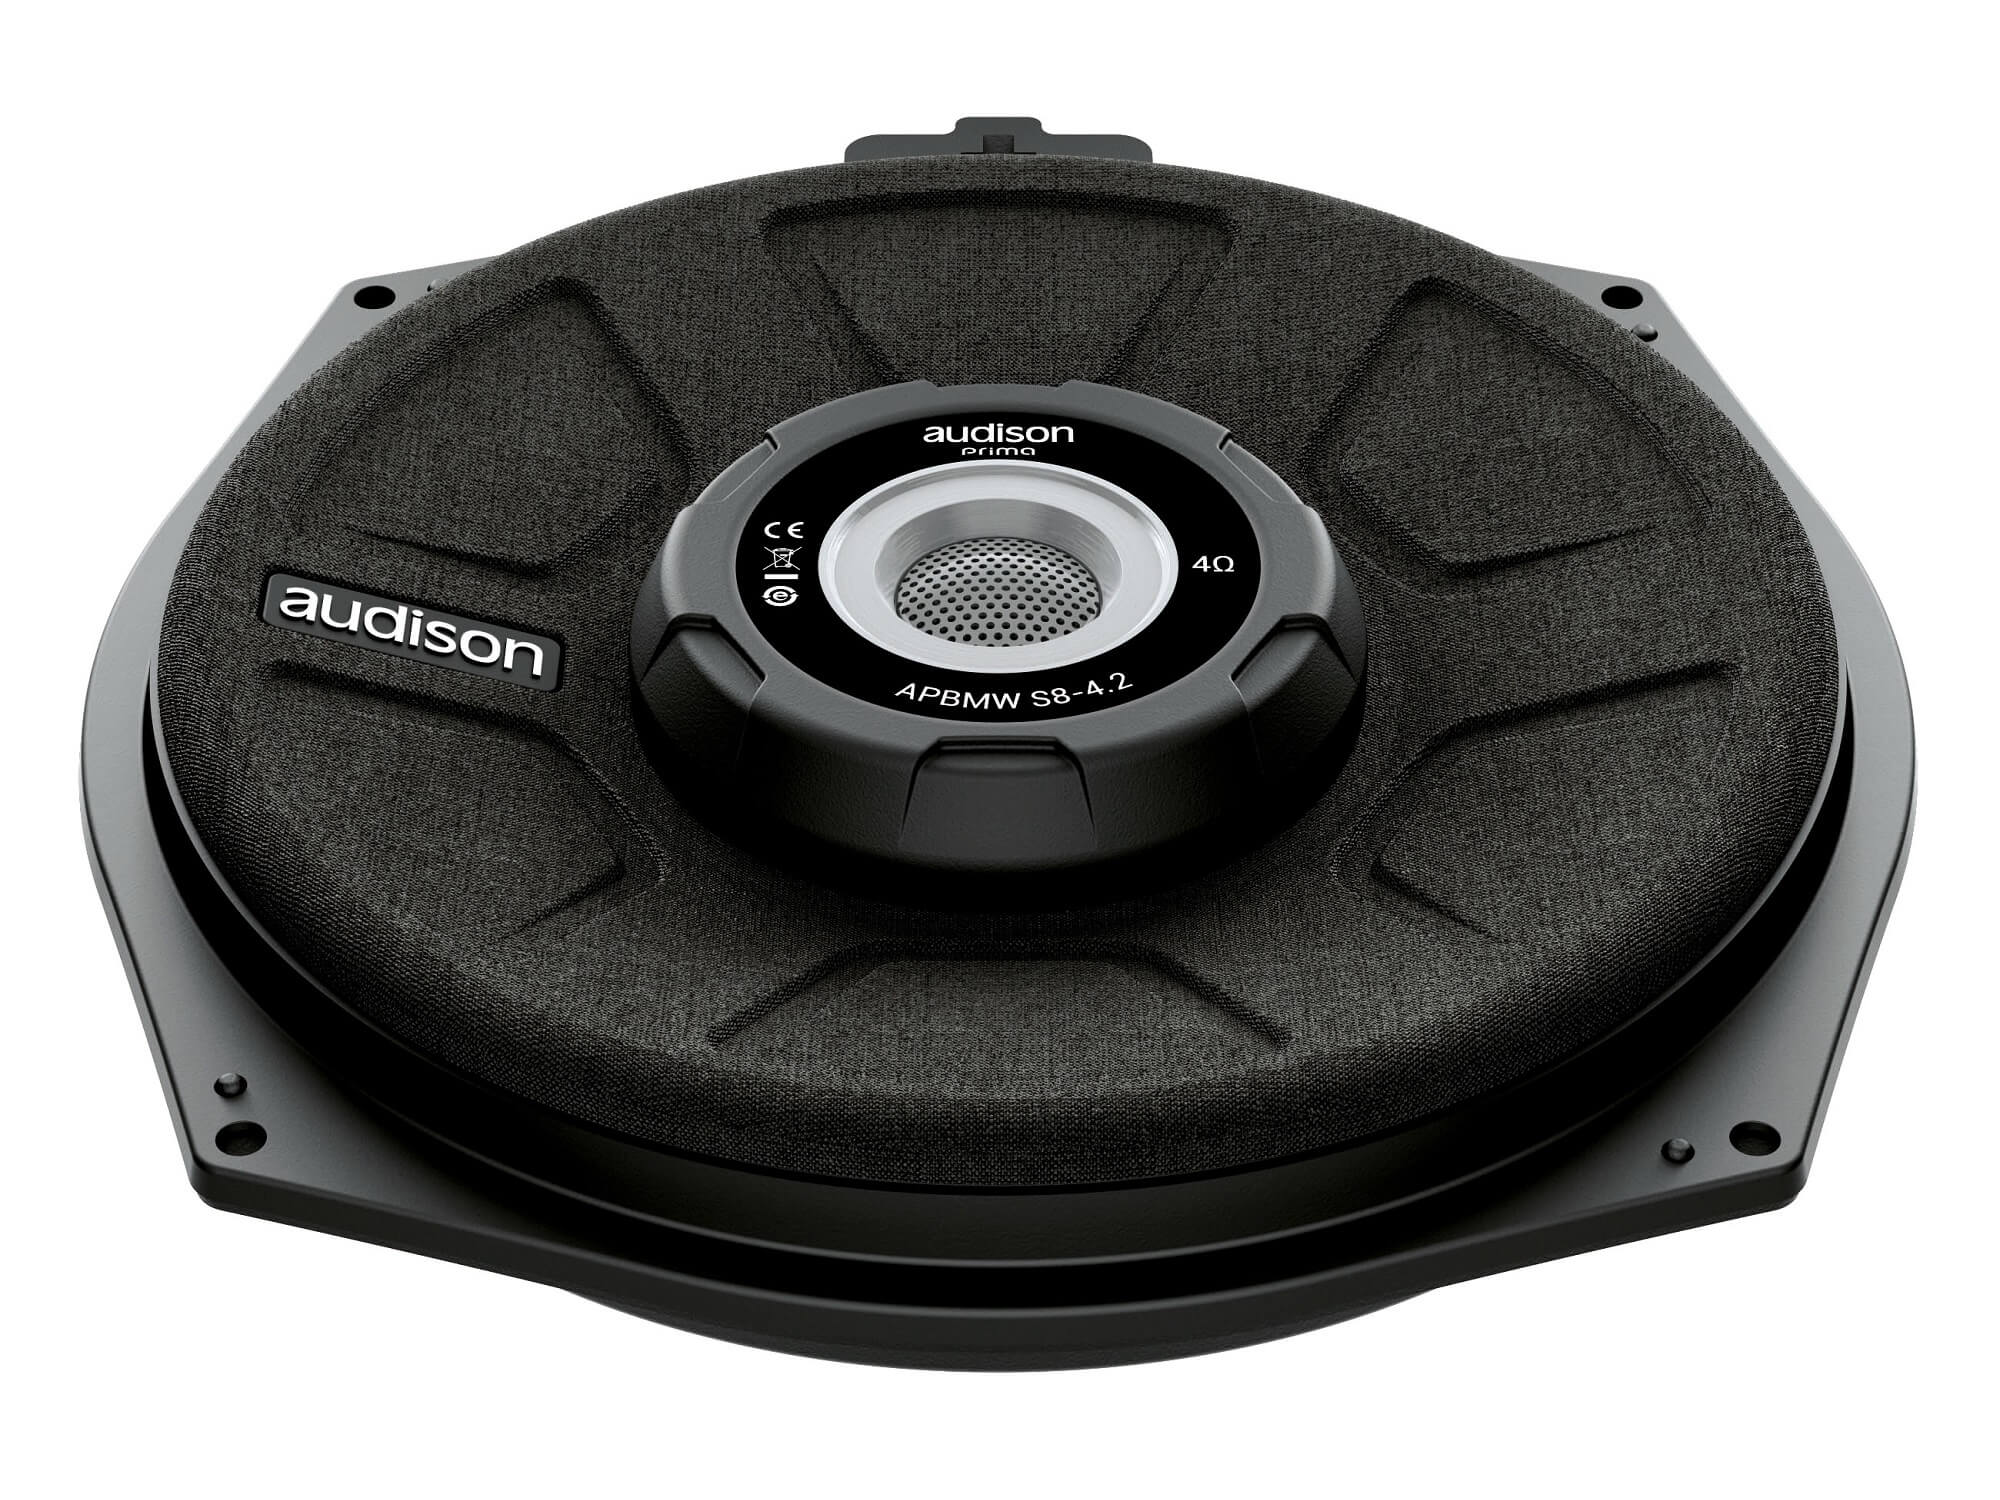 Audison Prima APBMW S8-4.2 - Subwoofer for BMW